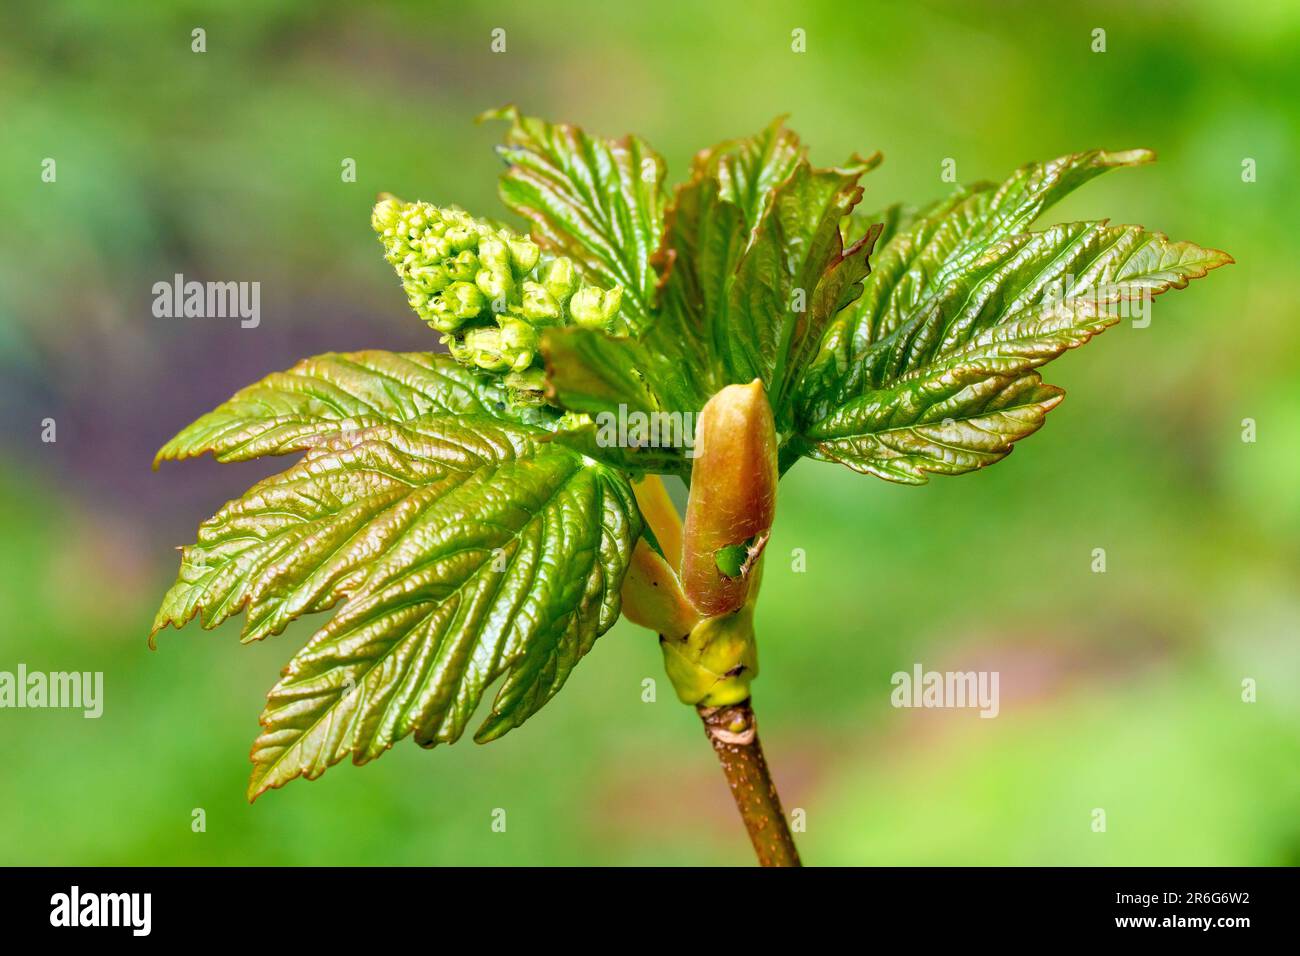 Sycamore (acer pseudoplatanus), close up of a leaf bud opening up in the spring to reveal the new leaves and flowerbuds within. Stock Photo